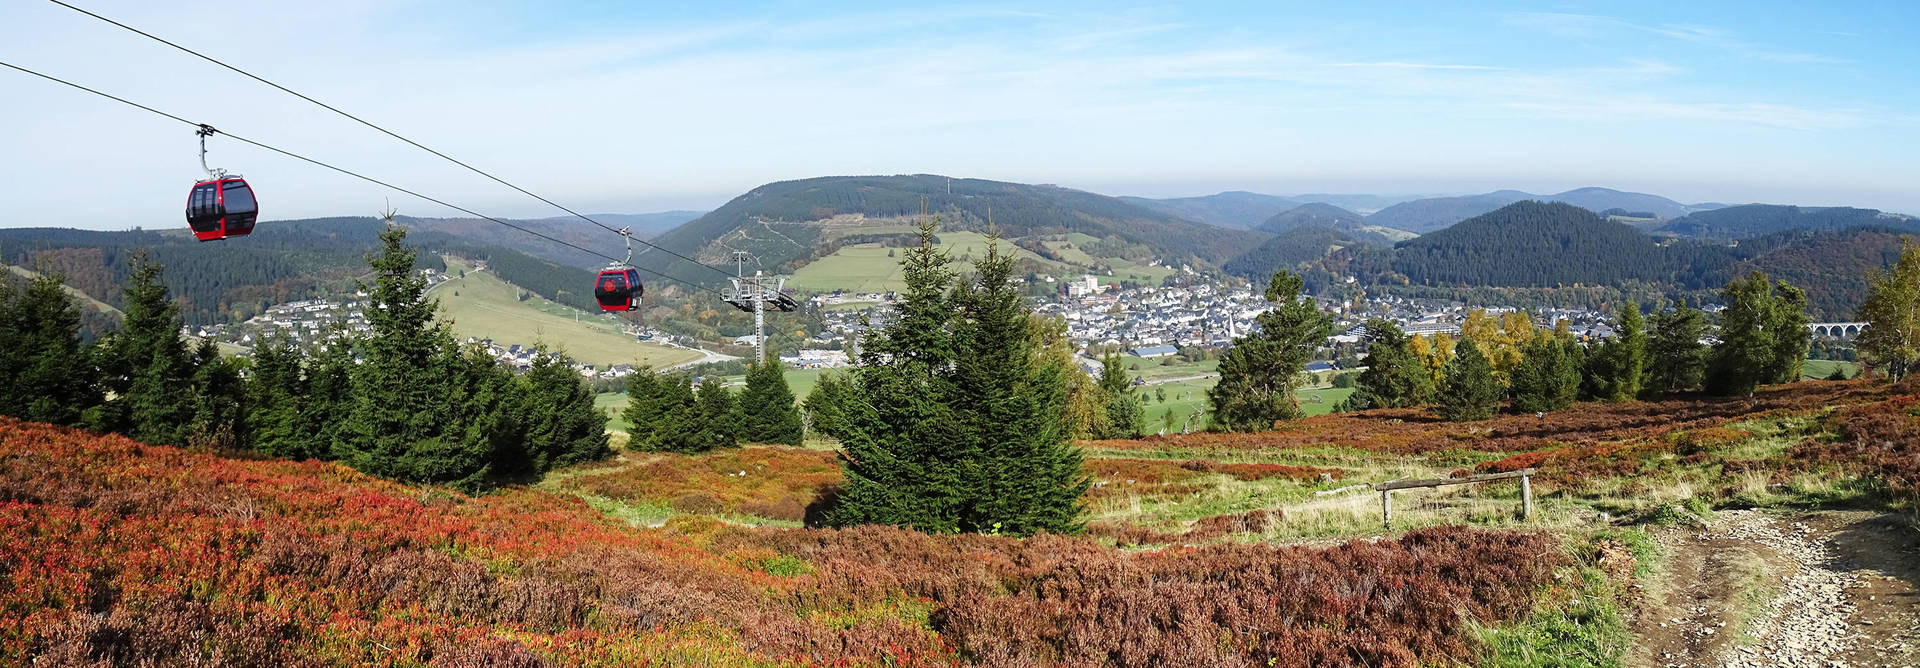 Places of interest near the H+ Hotel Willingen - Official website